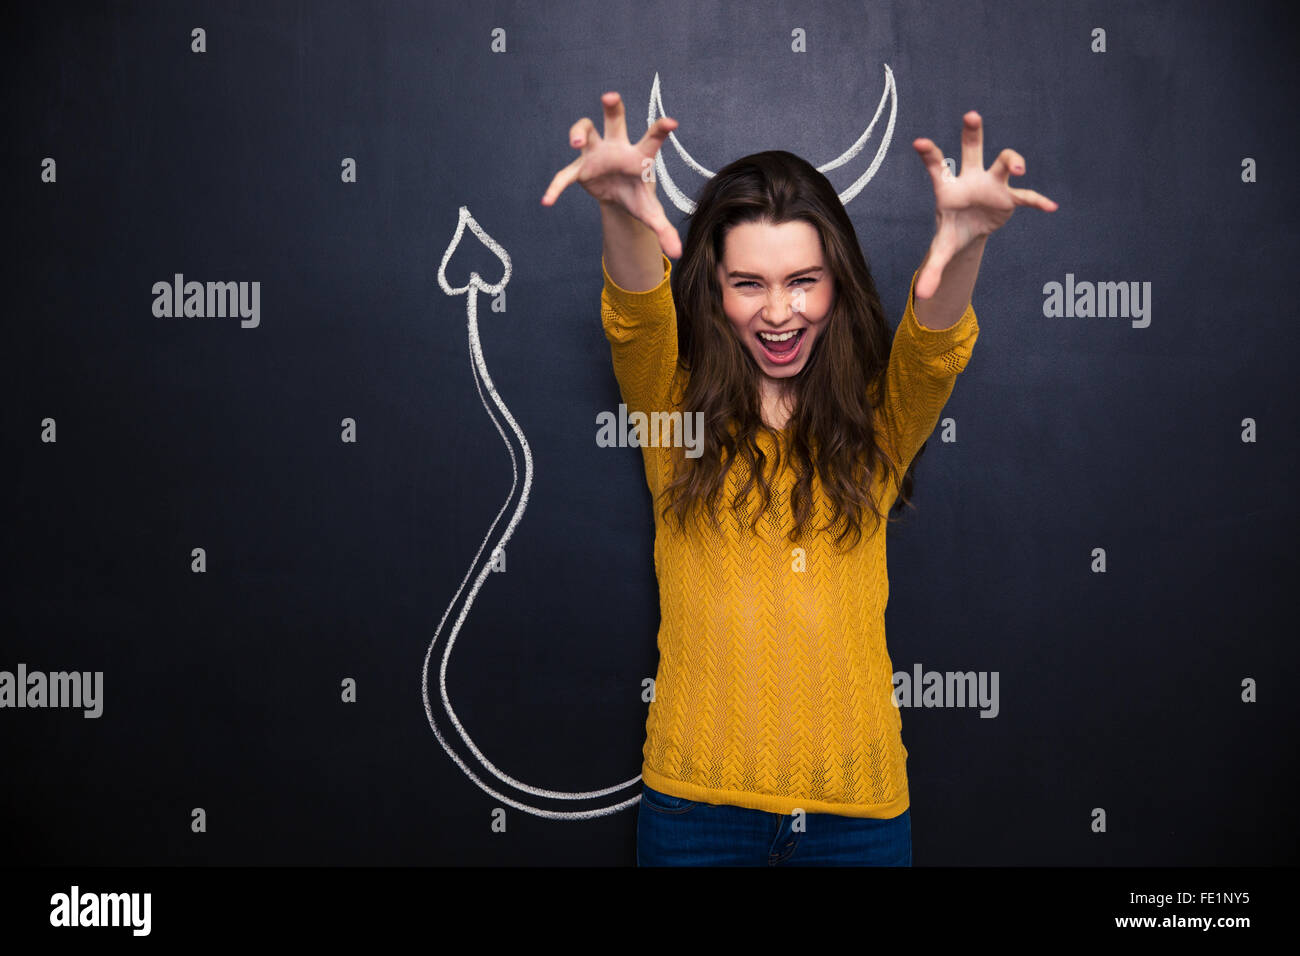 Shouting young woman with raised hands pretending devil standing over chalkboard background Stock Photo